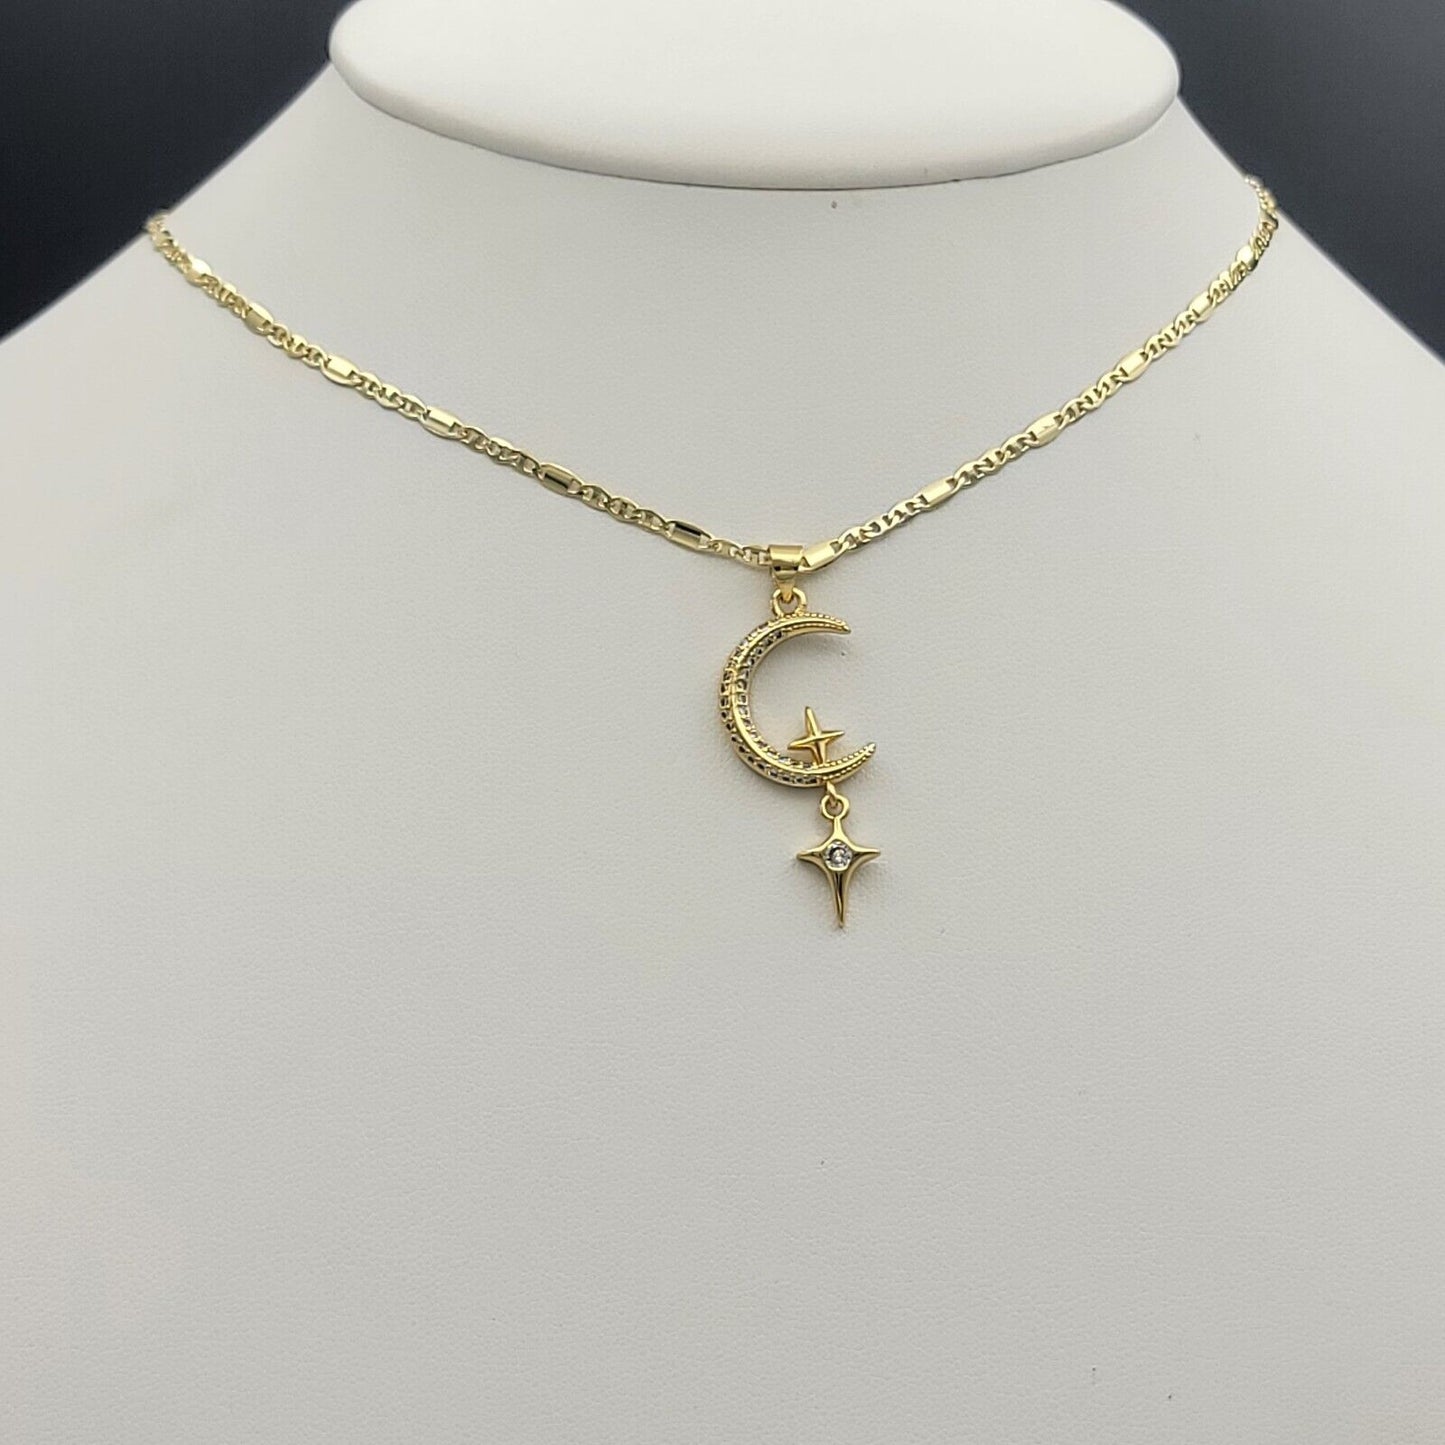 Necklaces - 14K Gold Plated. Moon & hanging shining stars Pendant & Chain. Galaxy Cosmic